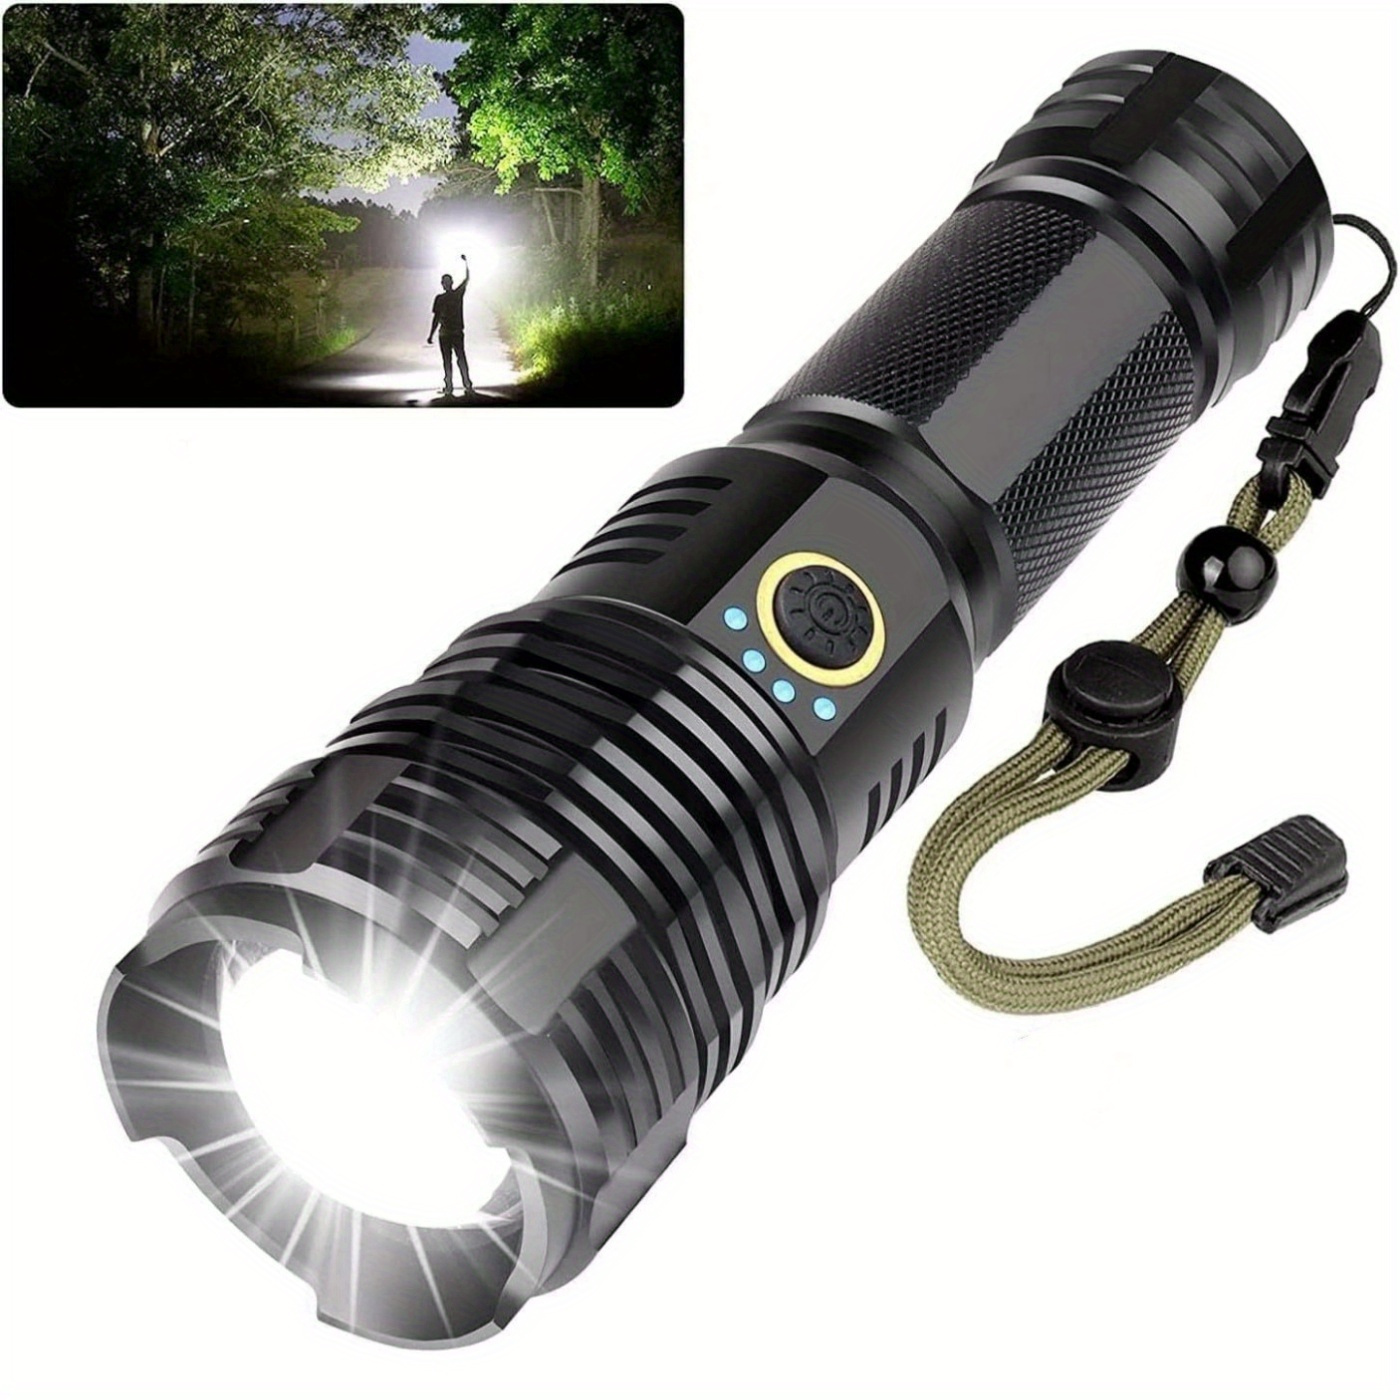 Lampe frontale LED rechargeable, 100000 lumens super lumineux